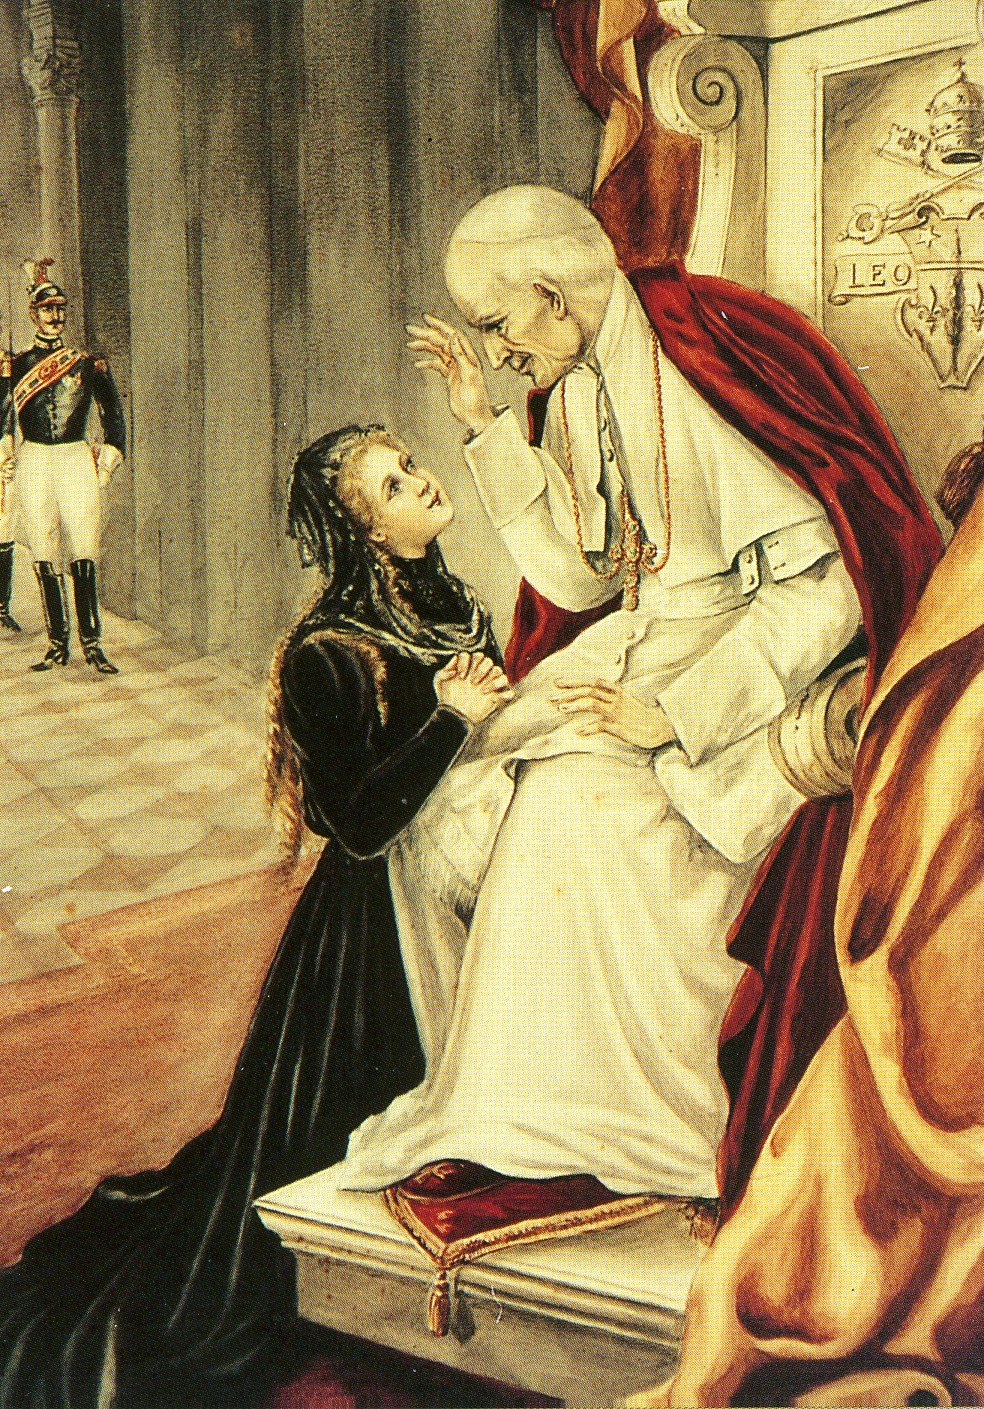 St. Therese asking Pope Leo XIII to allow her to enter Le Carmel. At this time, she was fifteen.